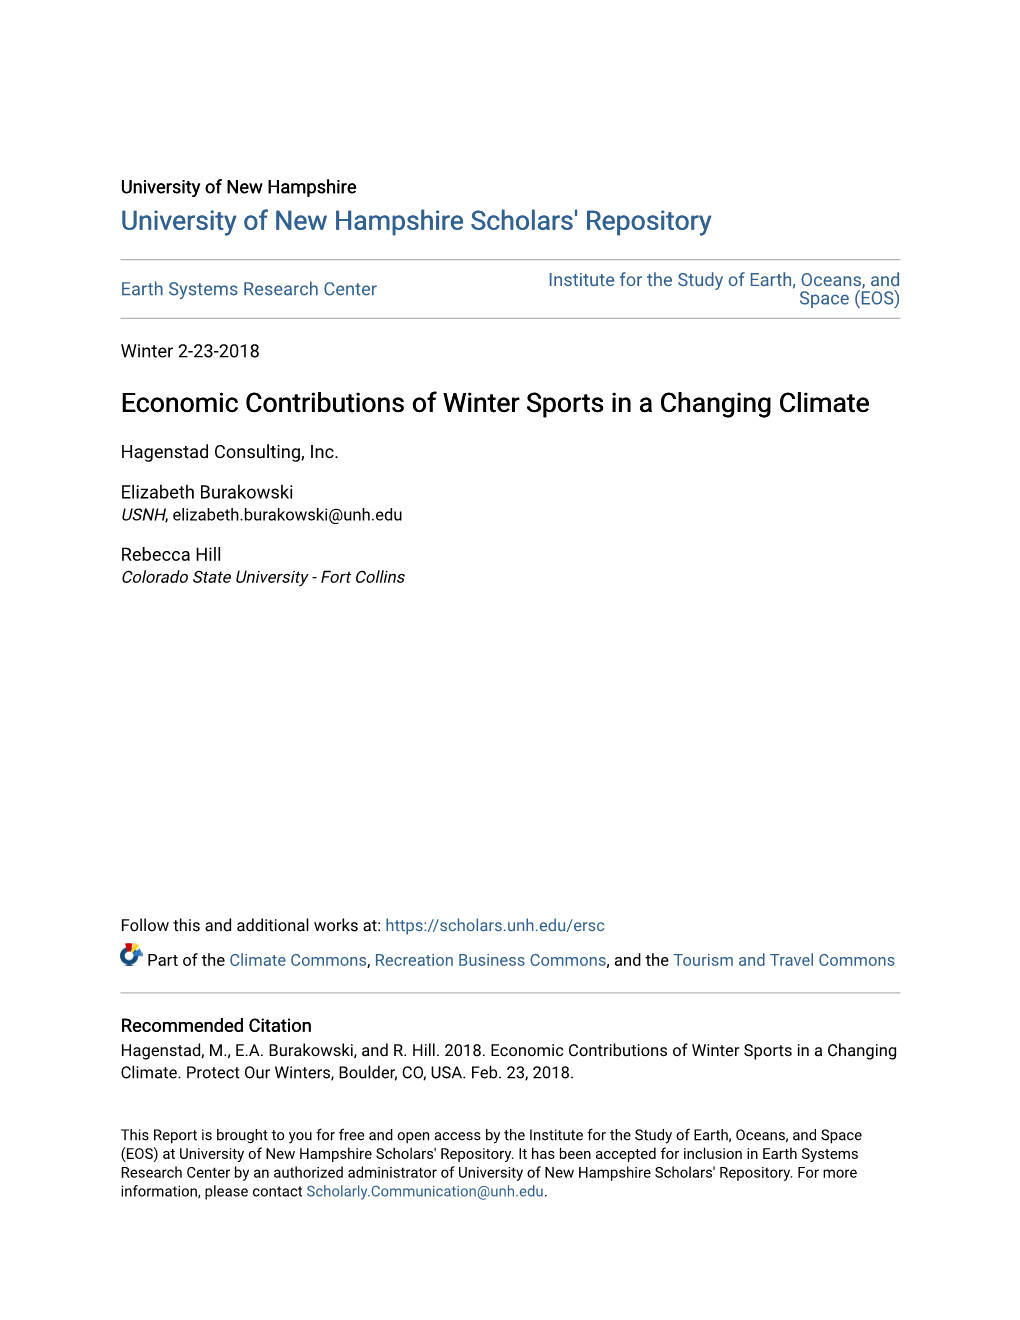 Economic Contributions of Winter Sports in a Changing Climate